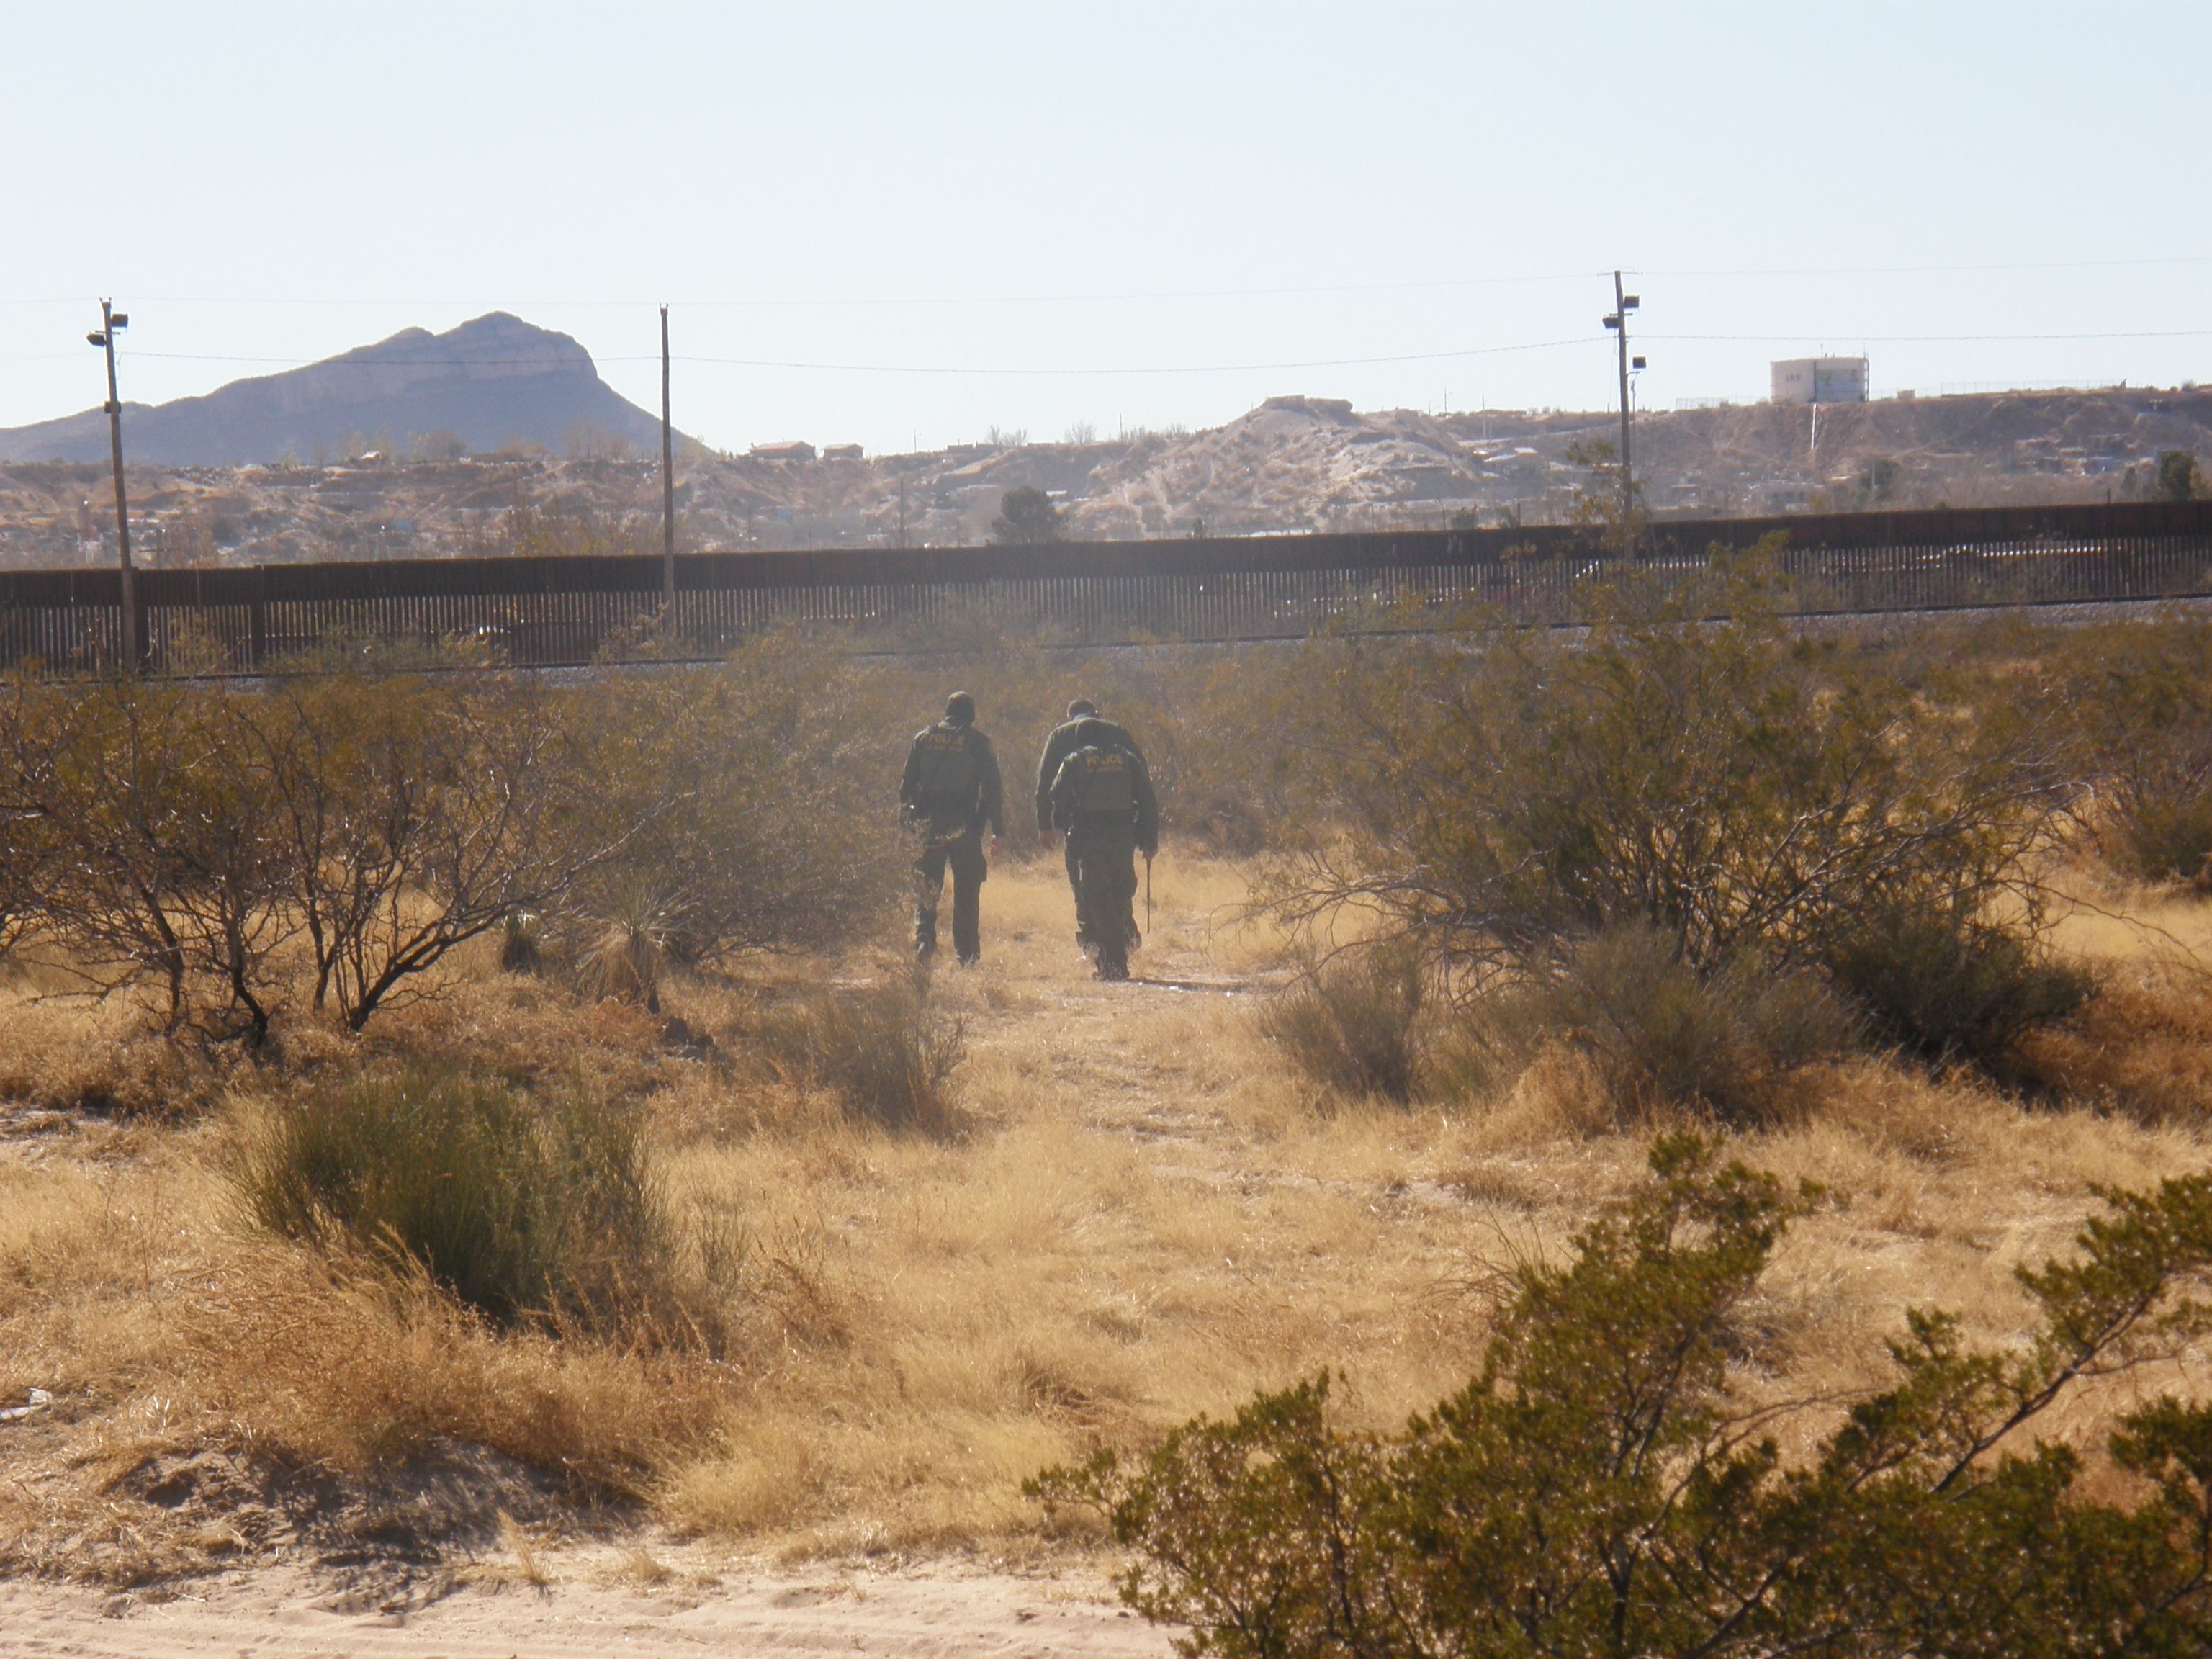 U.S. Border Patrol agents tracking a group of people who illegally entered Sunland Park, N.M. in December 2021.